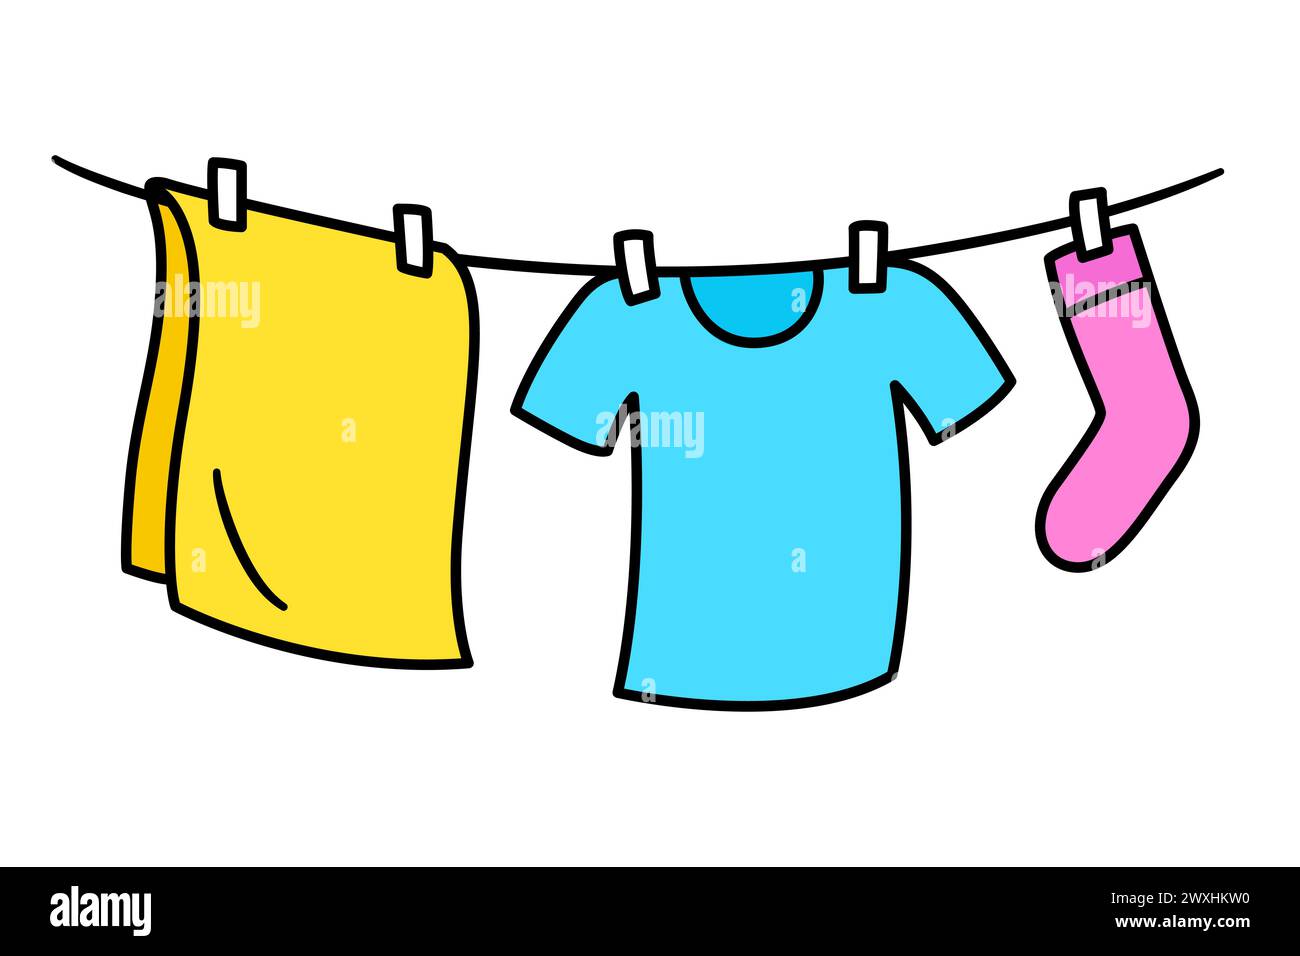 Clothes hanging to dry on washing line, simple doodle drawing. Bright cartoon laundry icon. Hand drawn vector illustration. Stock Vector